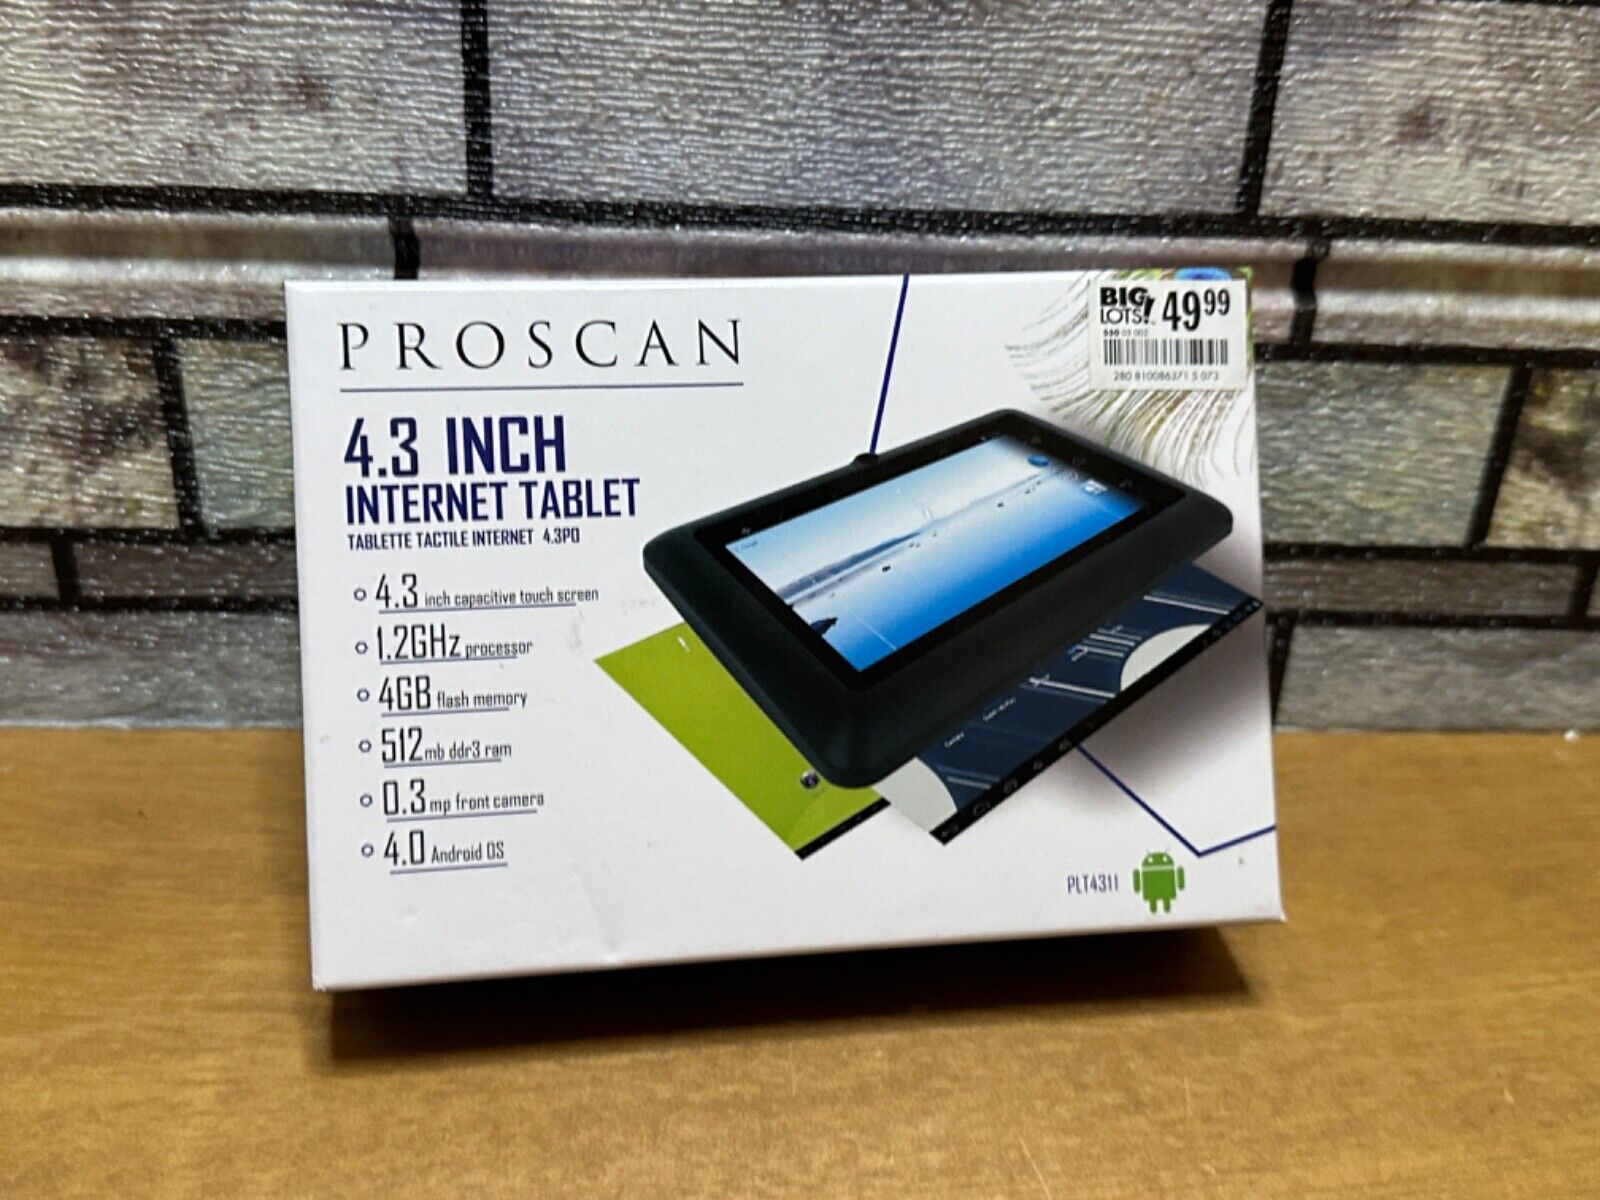 Proscan 4.3 Inch Android Touch Screen Tablet w Box, Free QuikShip